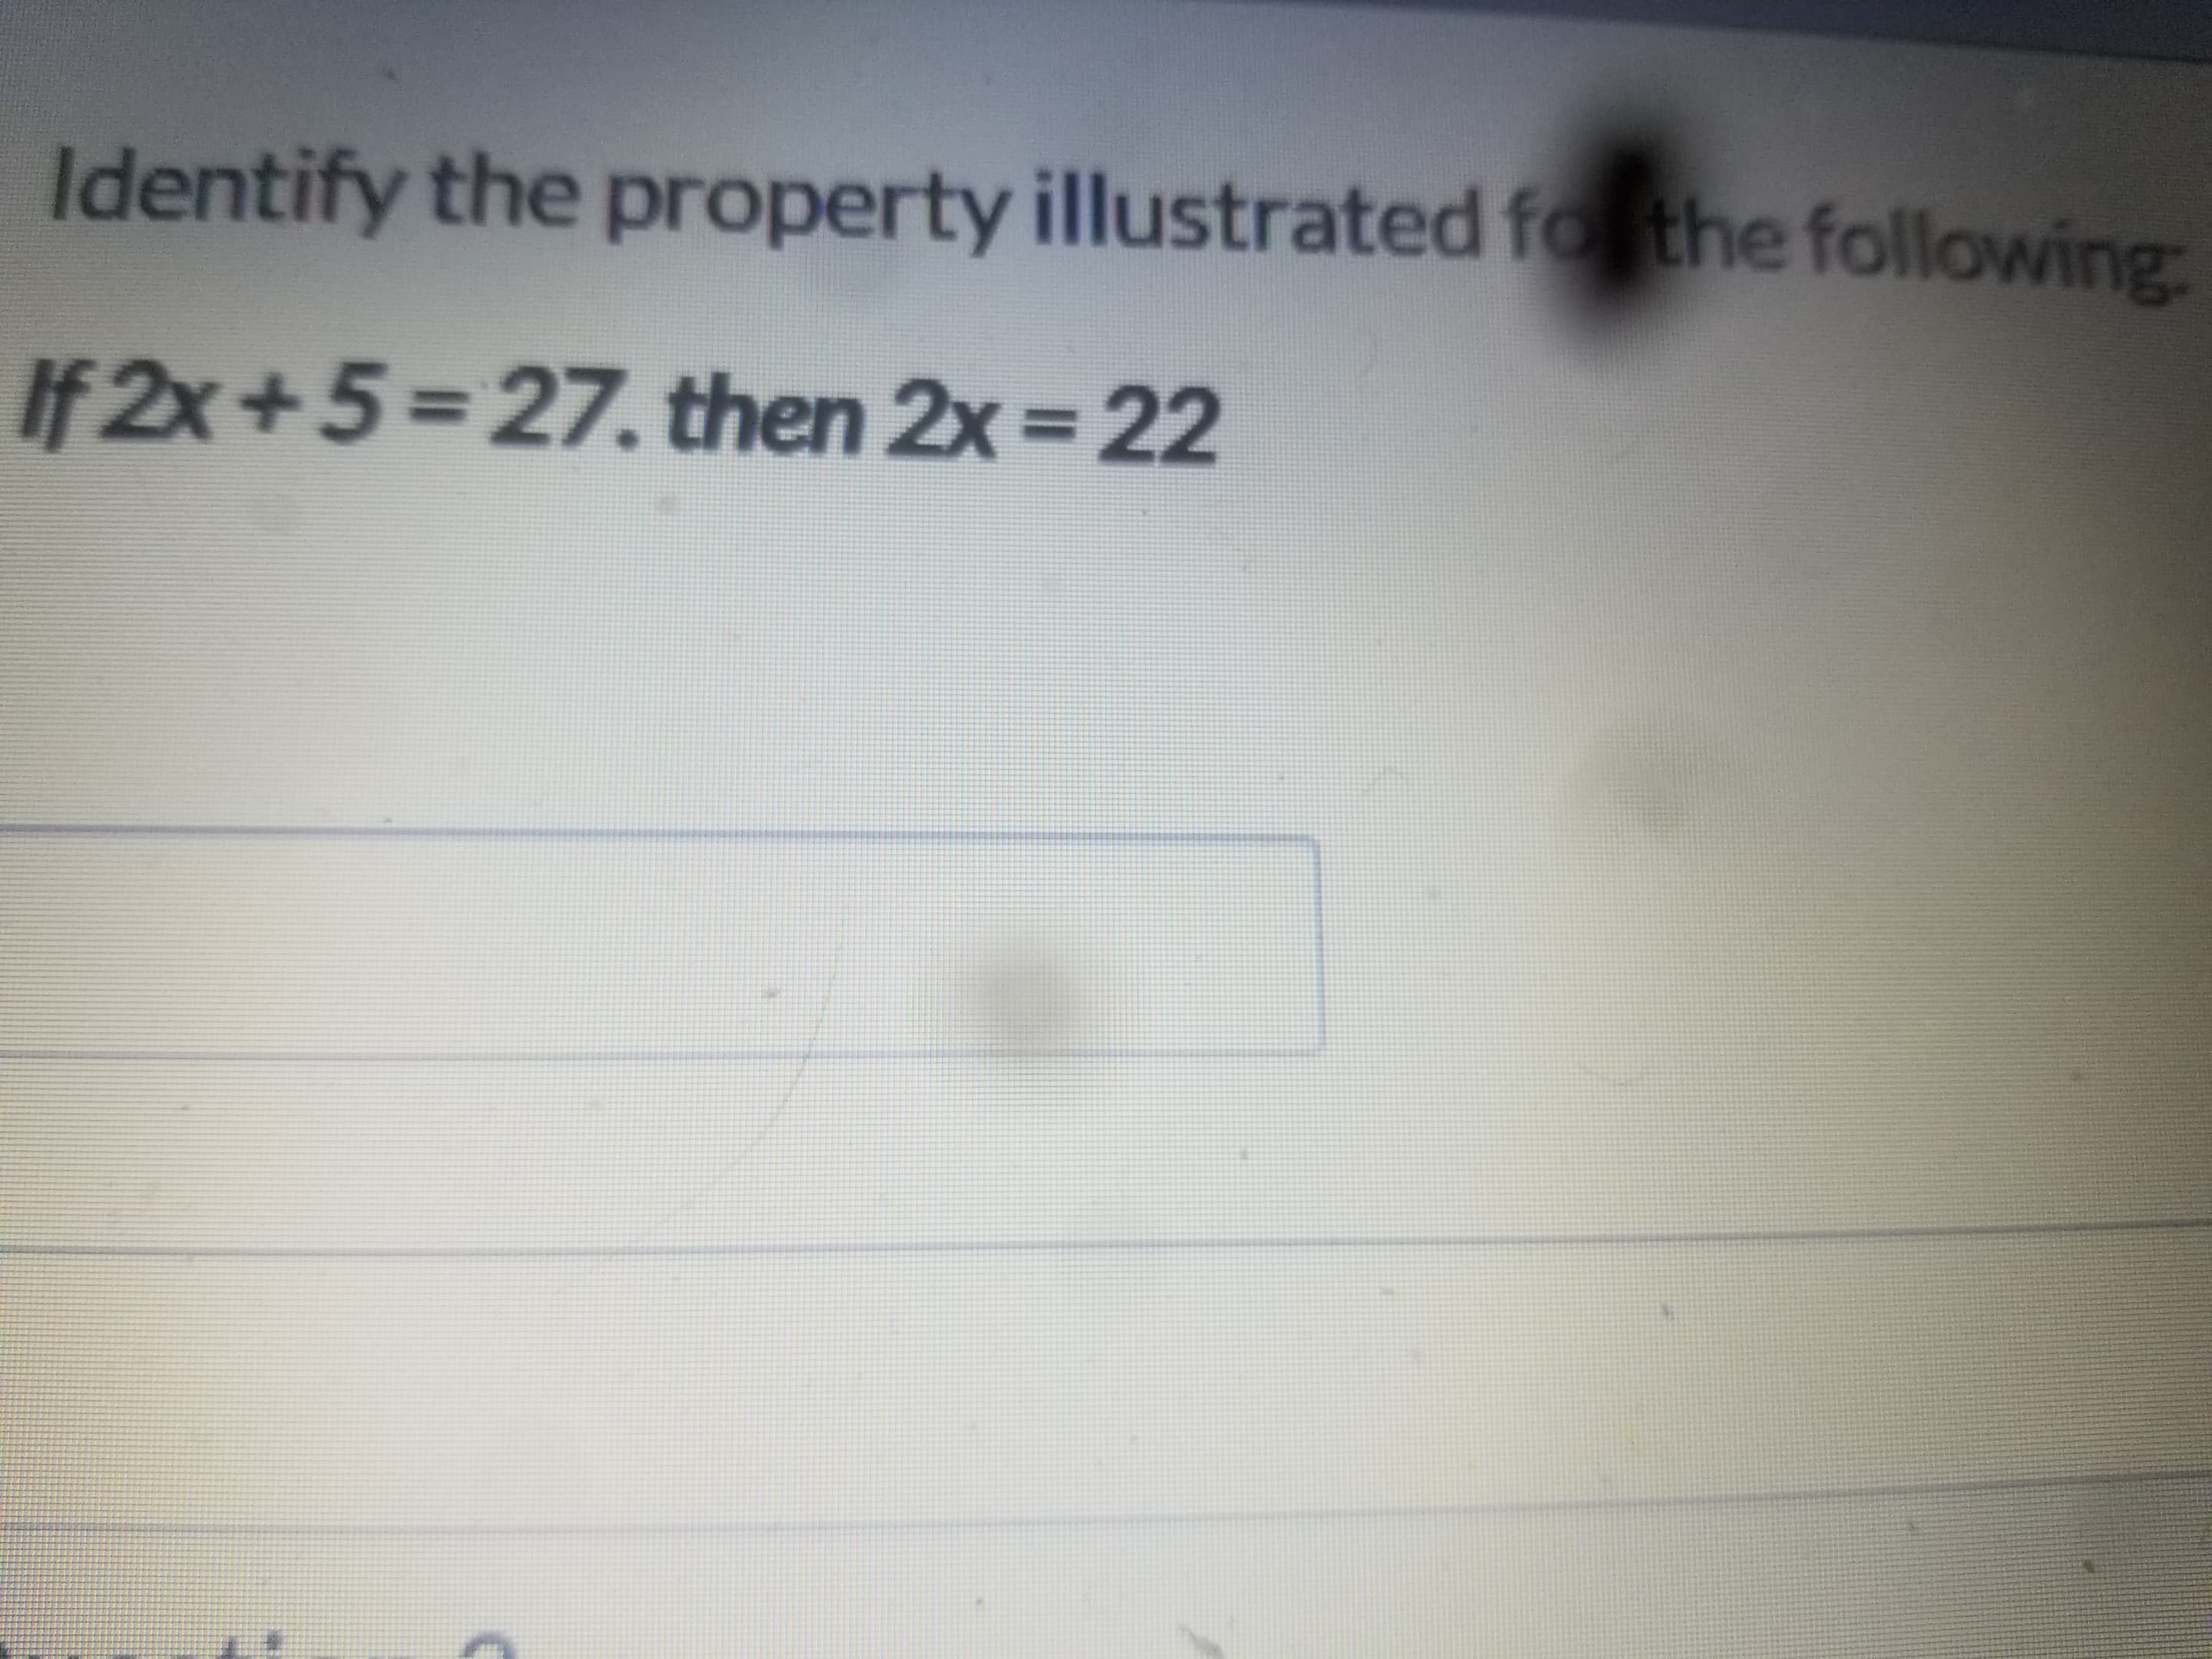 Identify the property illustrated fo the following:
If 2x+5=27. then 2x= 22
